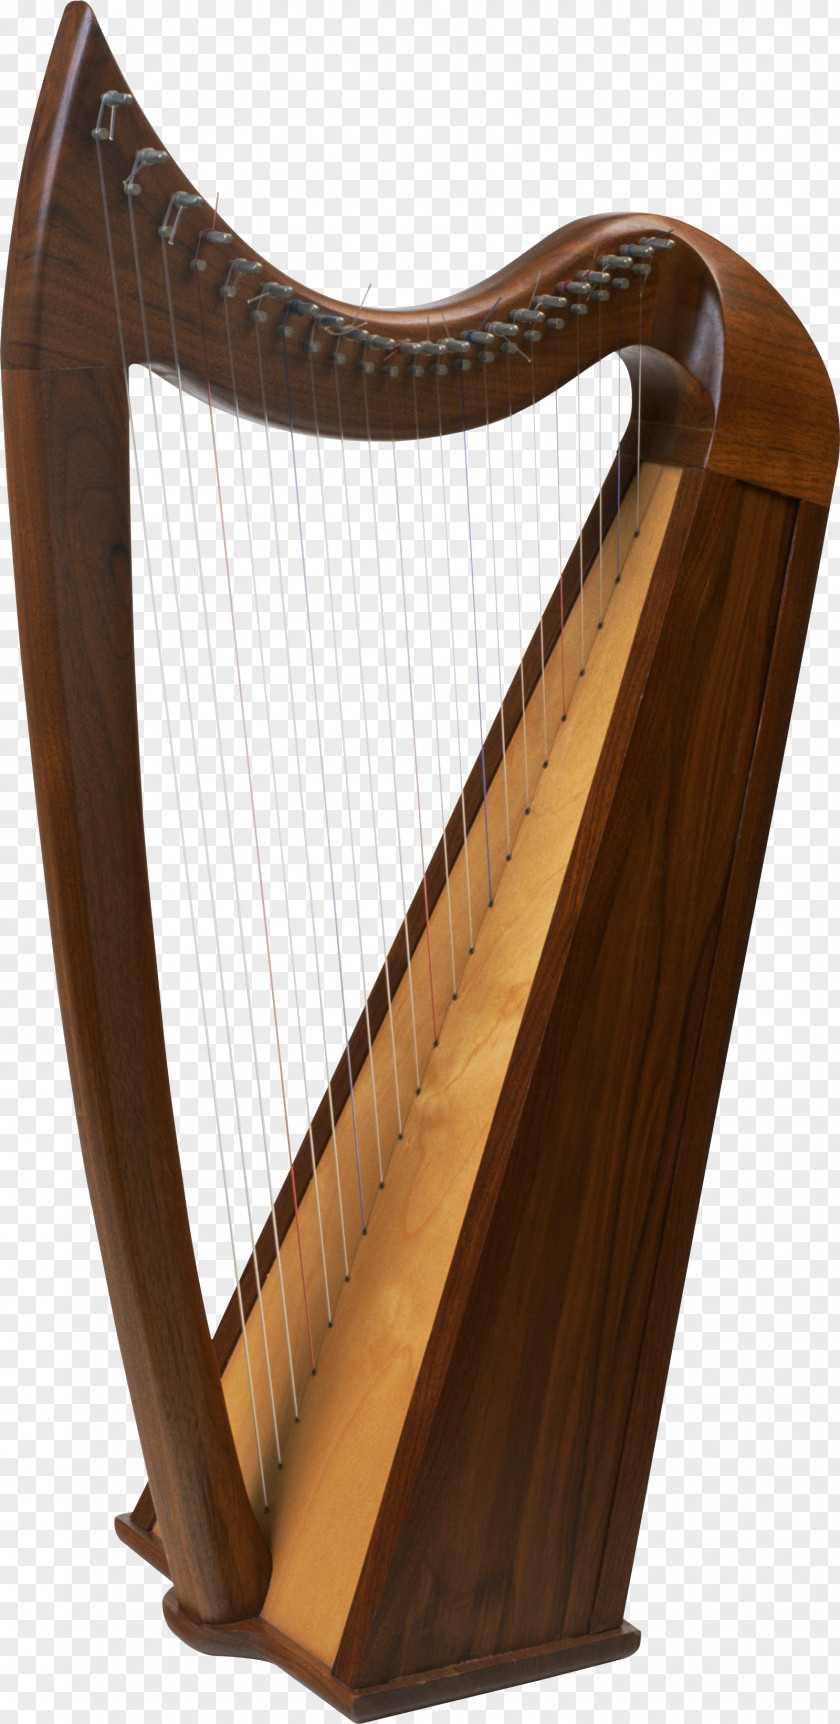 Harp Musical Instrument Plucked String PNG